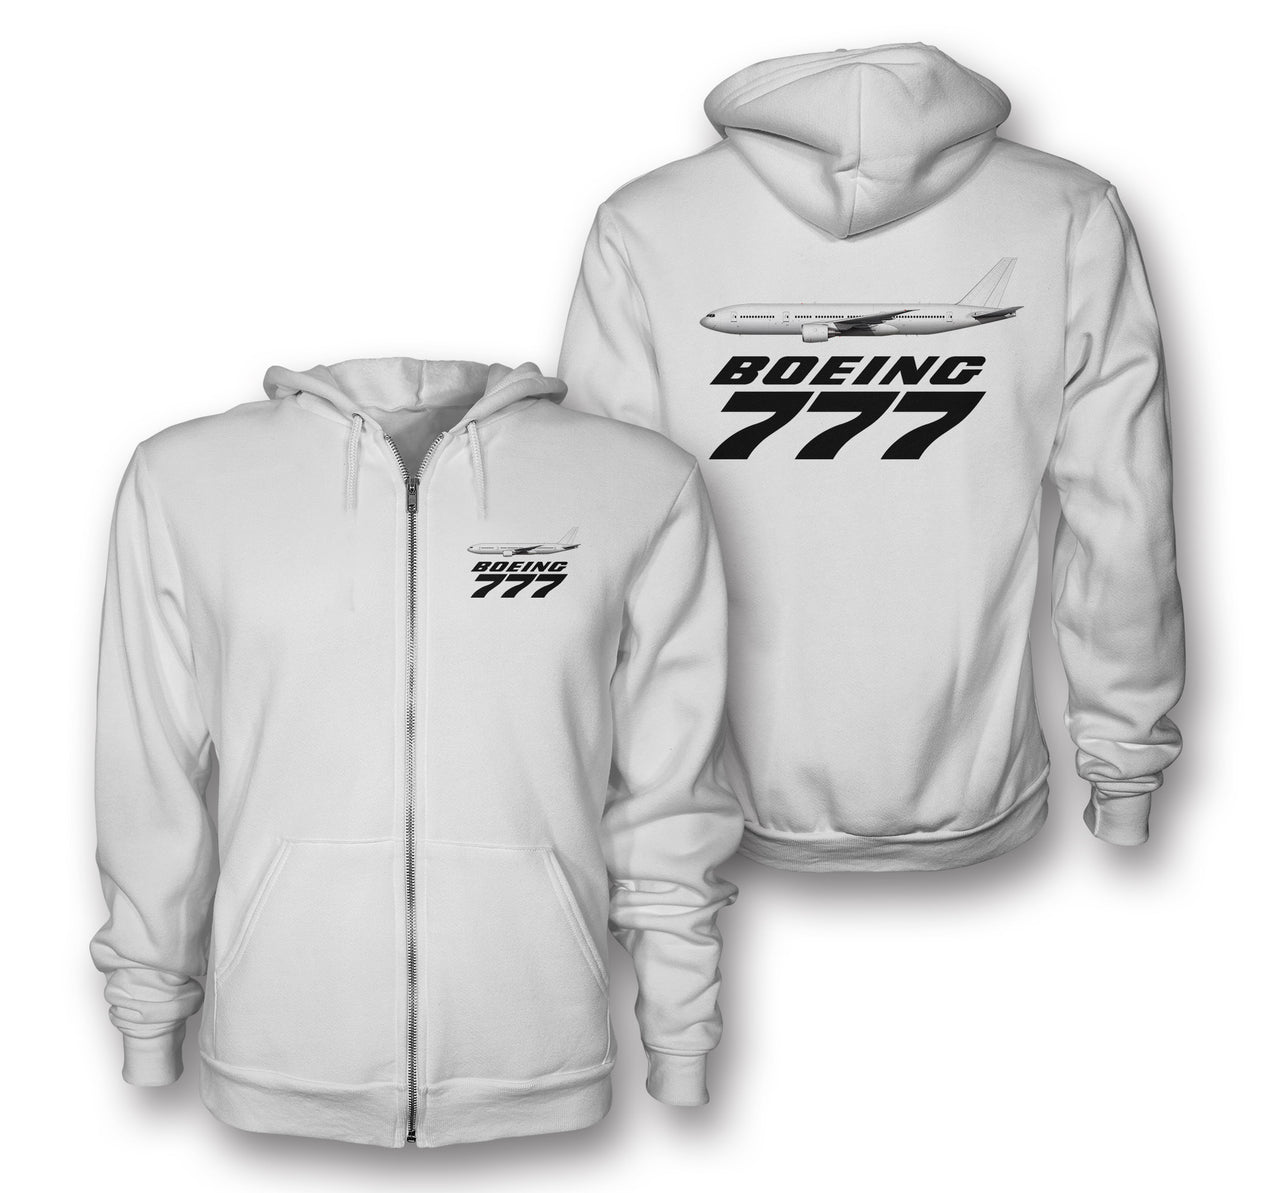 The Boeing 777 Designed Zipped Hoodies